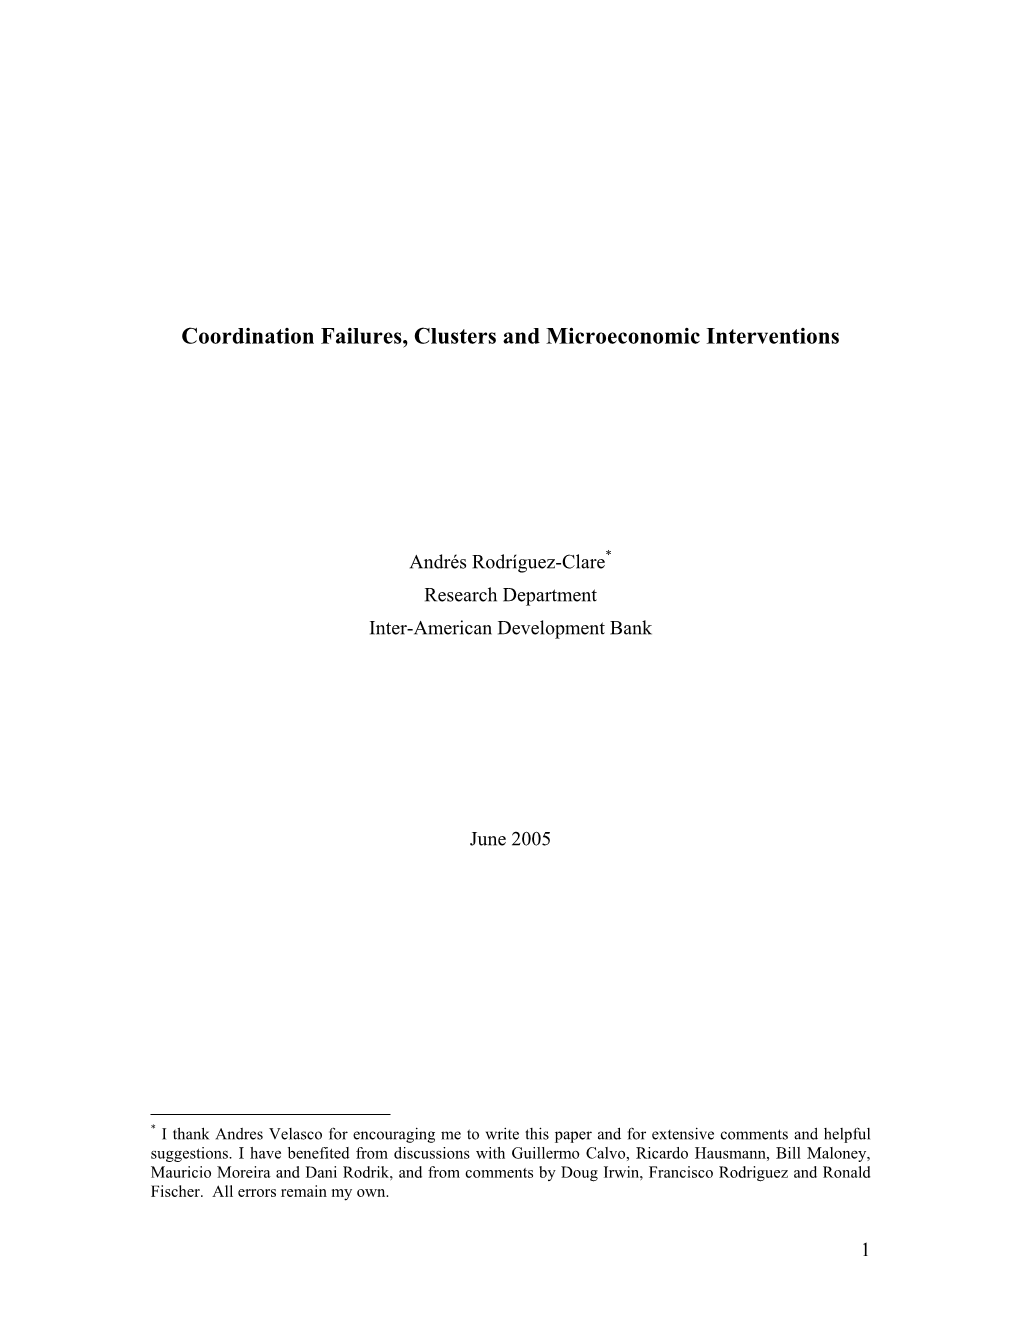 Coordination Failures, Clusters and Microeconomic Interventions